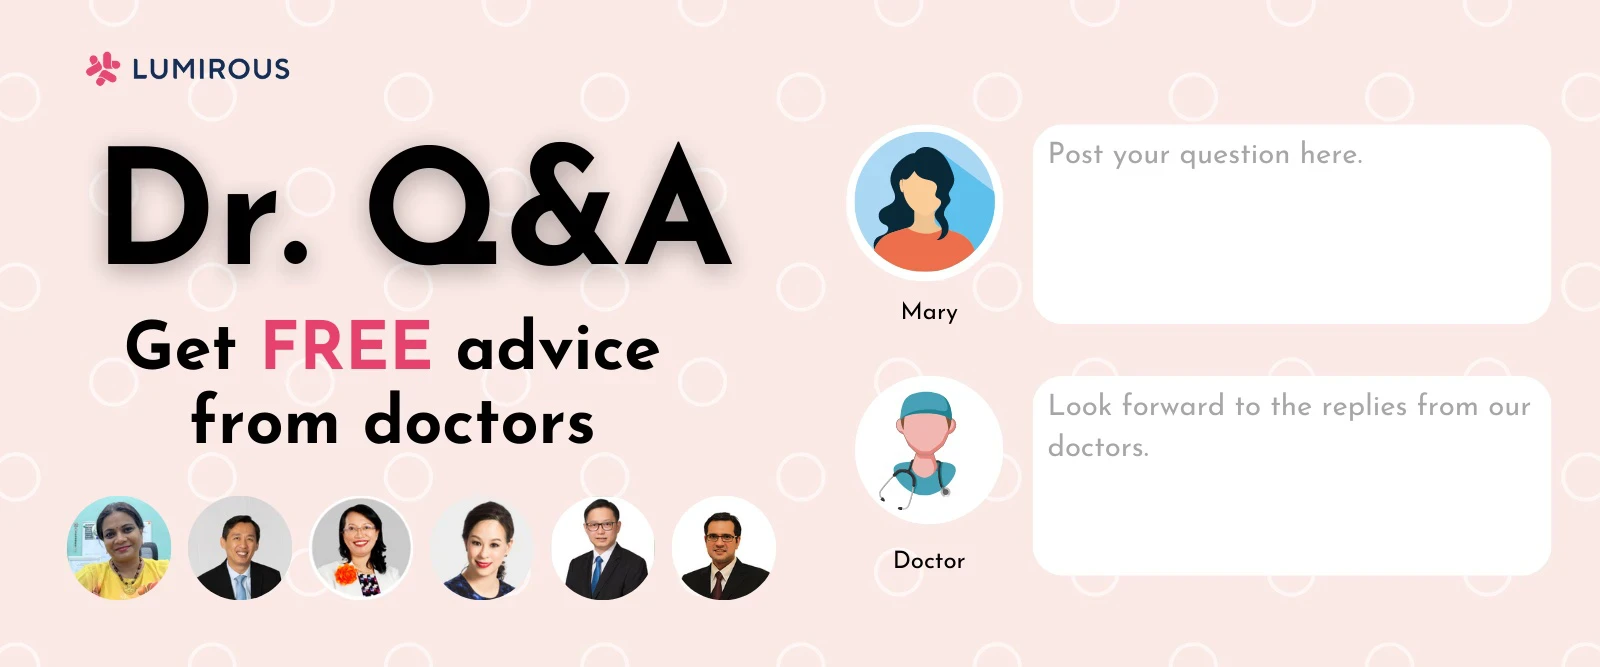 Dr Q&A, Free Advise from Fertility Doctor